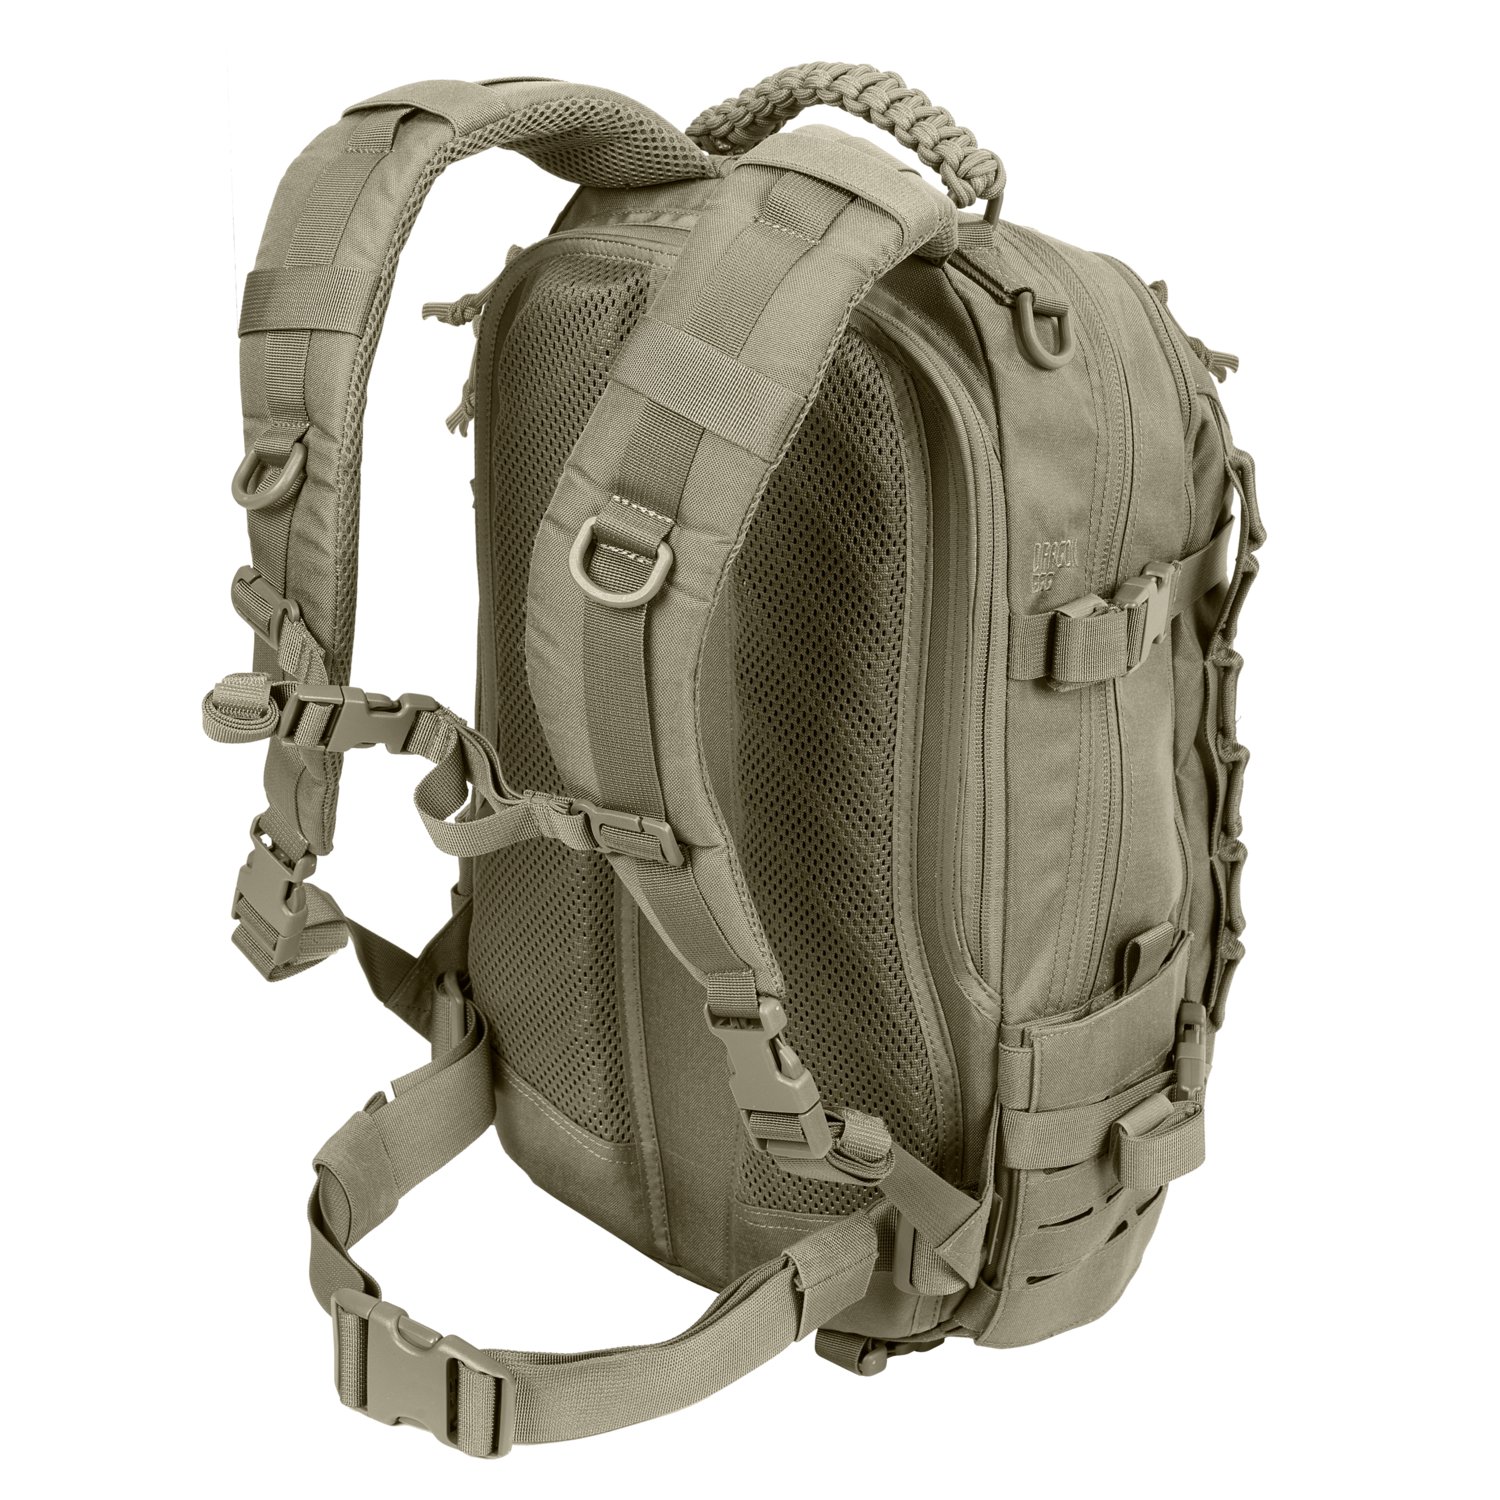 Dragon Egg MK II Backpack | On Duty Equipment Contract Division